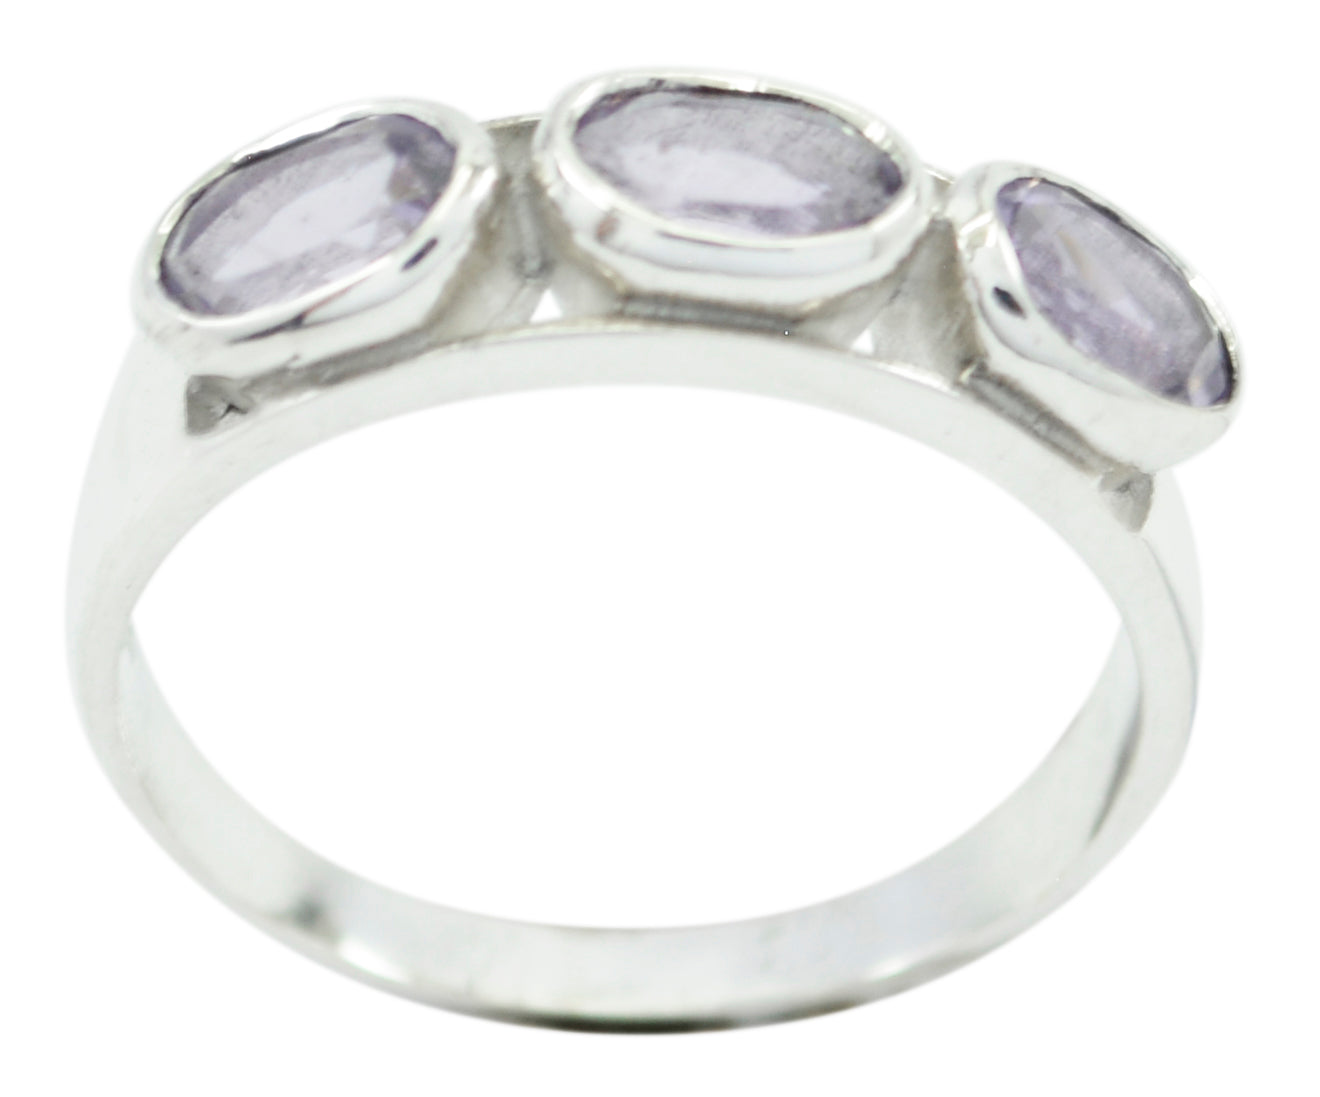 Fascinating Gemstone Amethyst Solid Silver Rings Christmas Day Gift